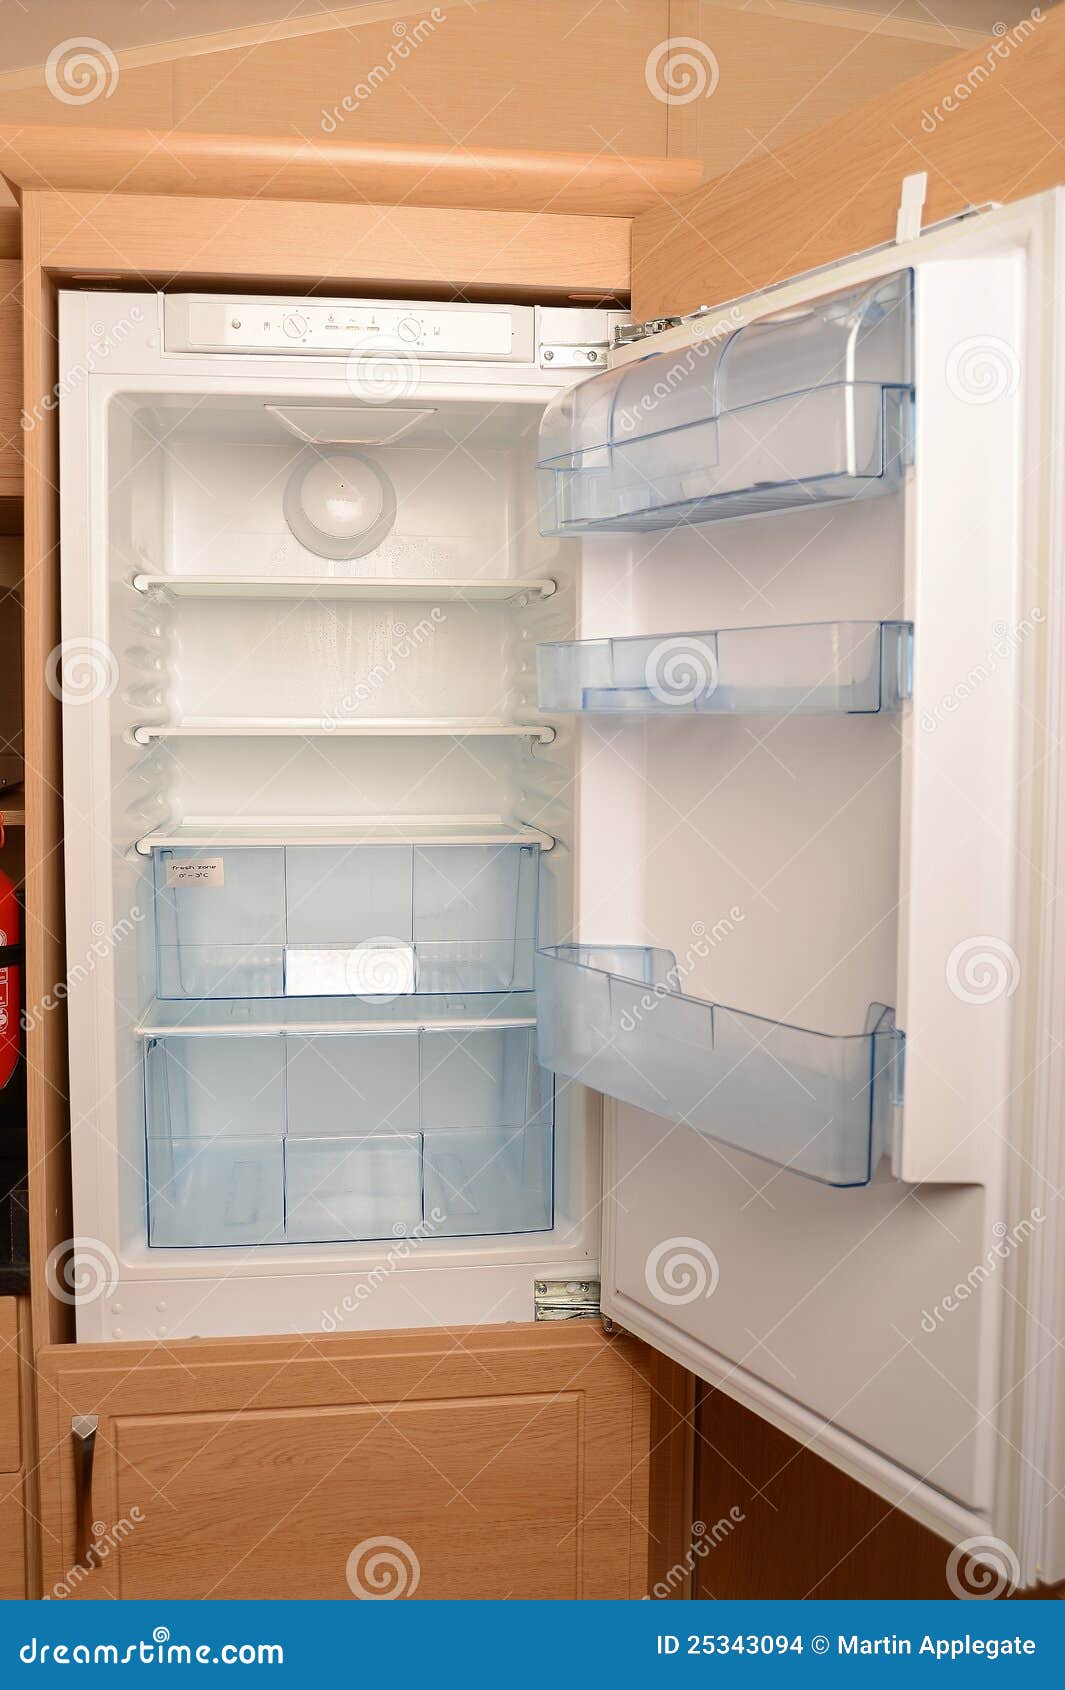 Empty Open Refrigerator Stock Images - Image: 25343094